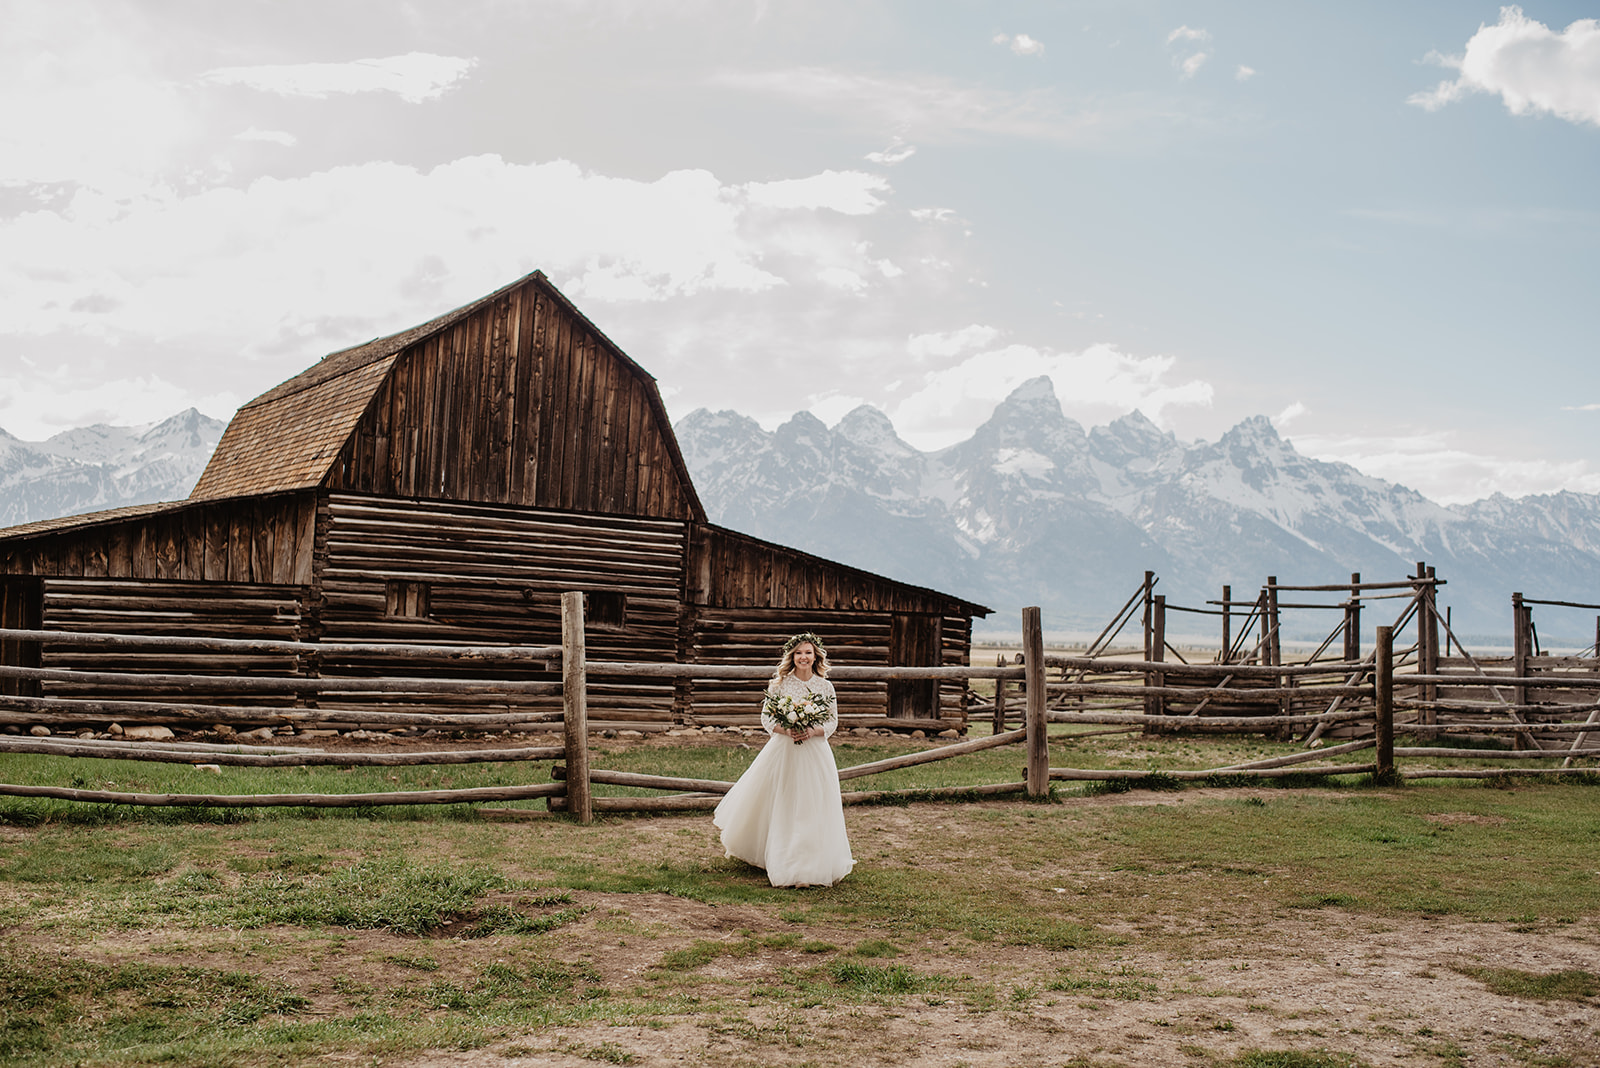 bride walking in front of an old historic barn in the mountains for her wedding photos with Jackson Hole wedding photographers